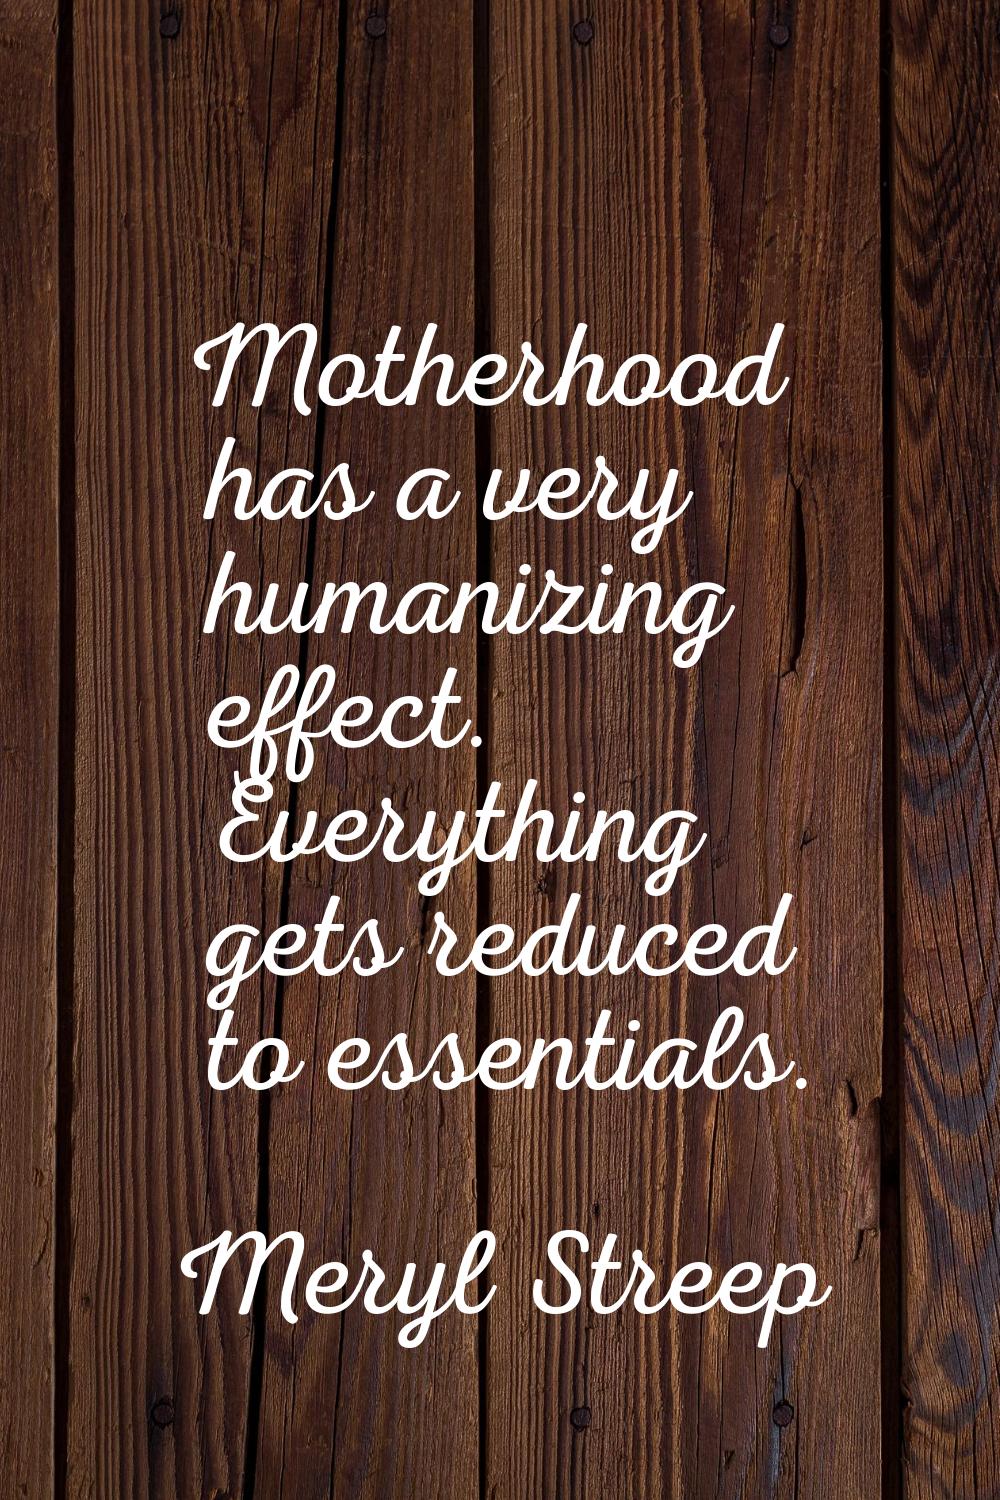 Motherhood has a very humanizing effect. Everything gets reduced to essentials.